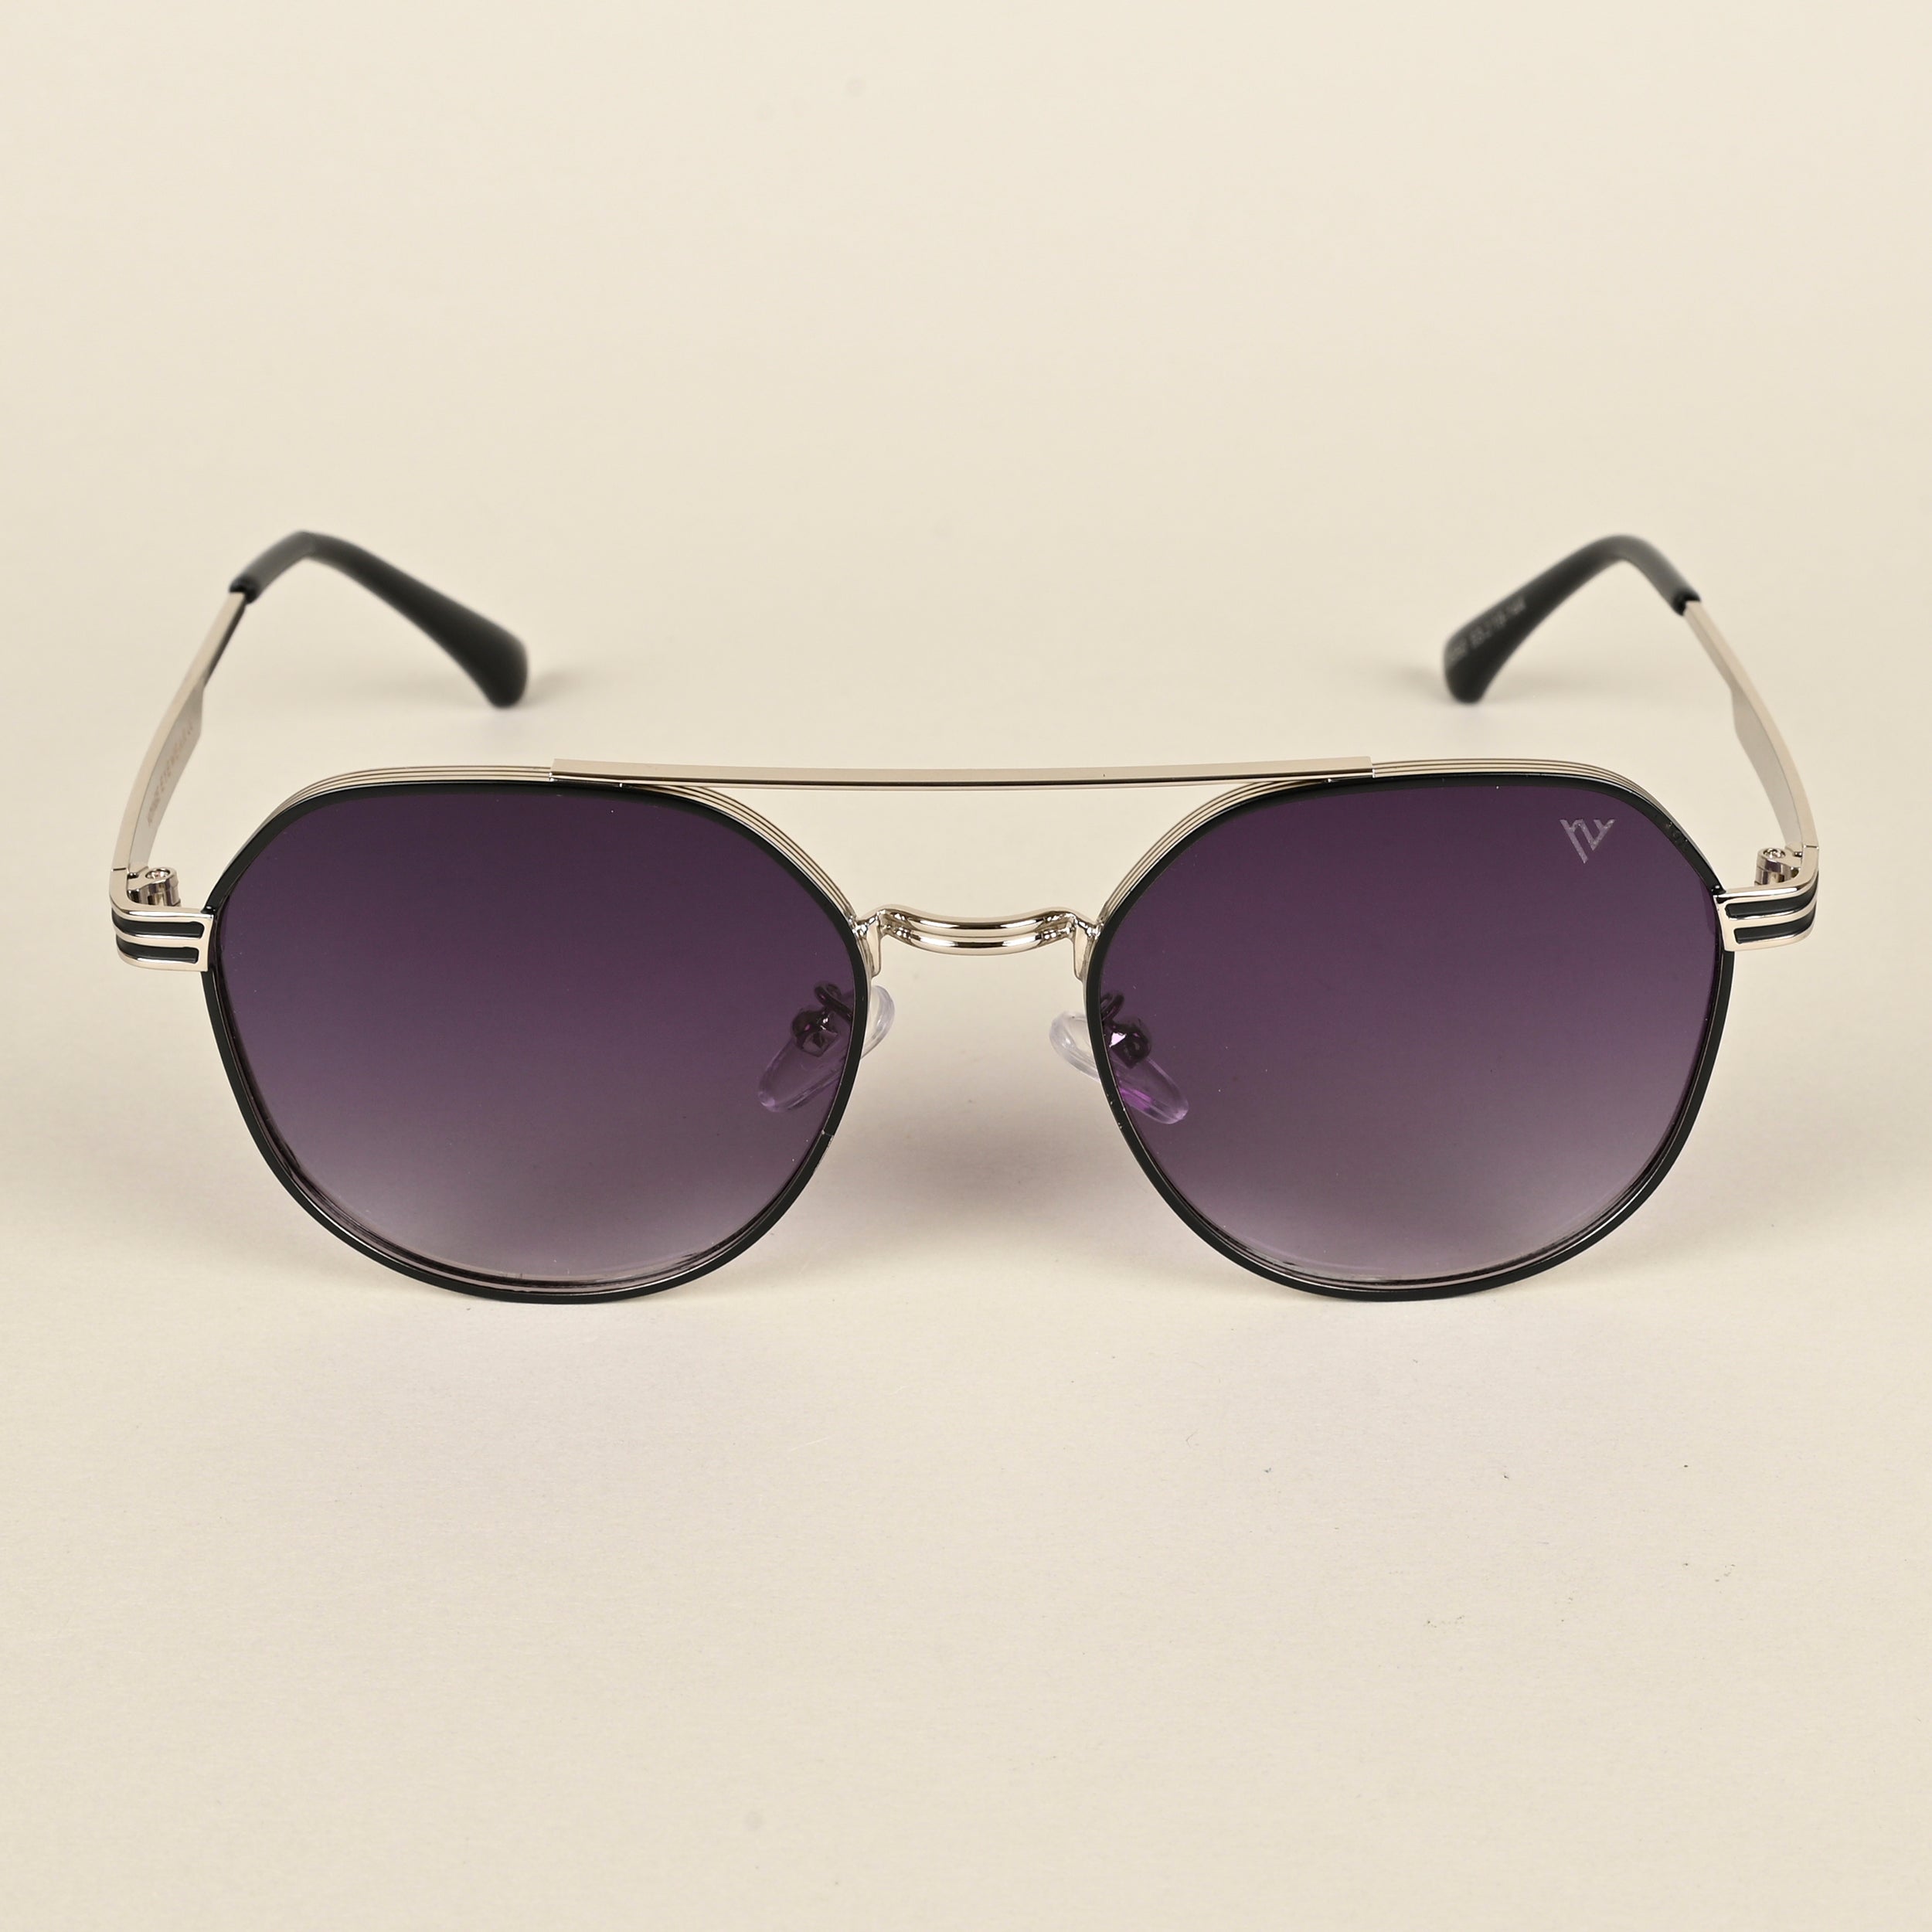 Voyage Purple & Clear Round Sunglasses for Men & Women - MG4333